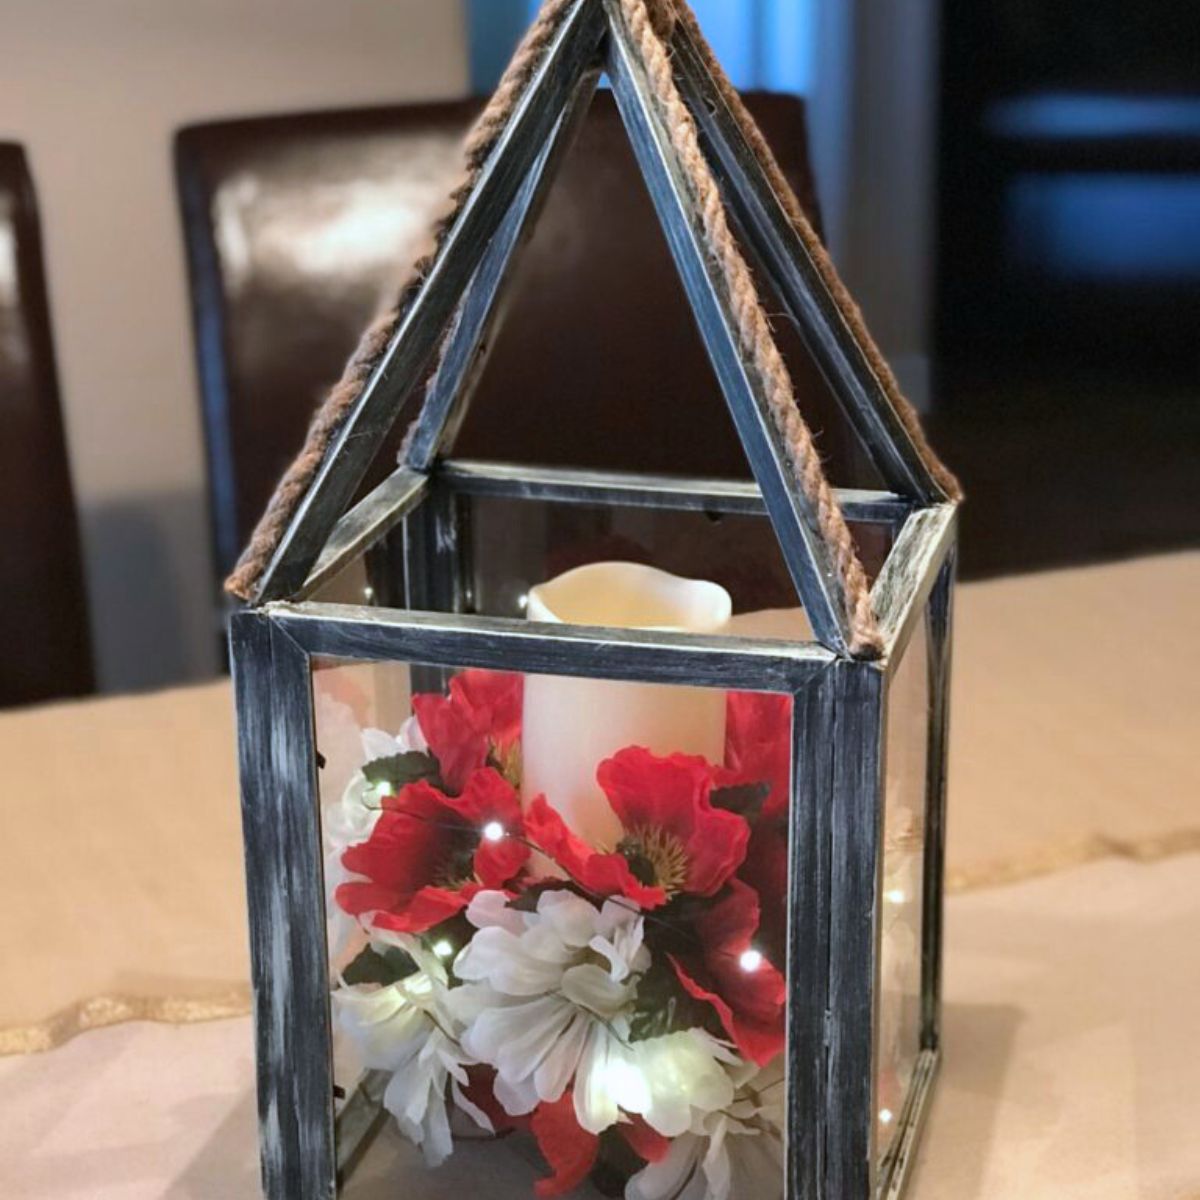 How To Make A Dollar Tree Picture Frame Lantern